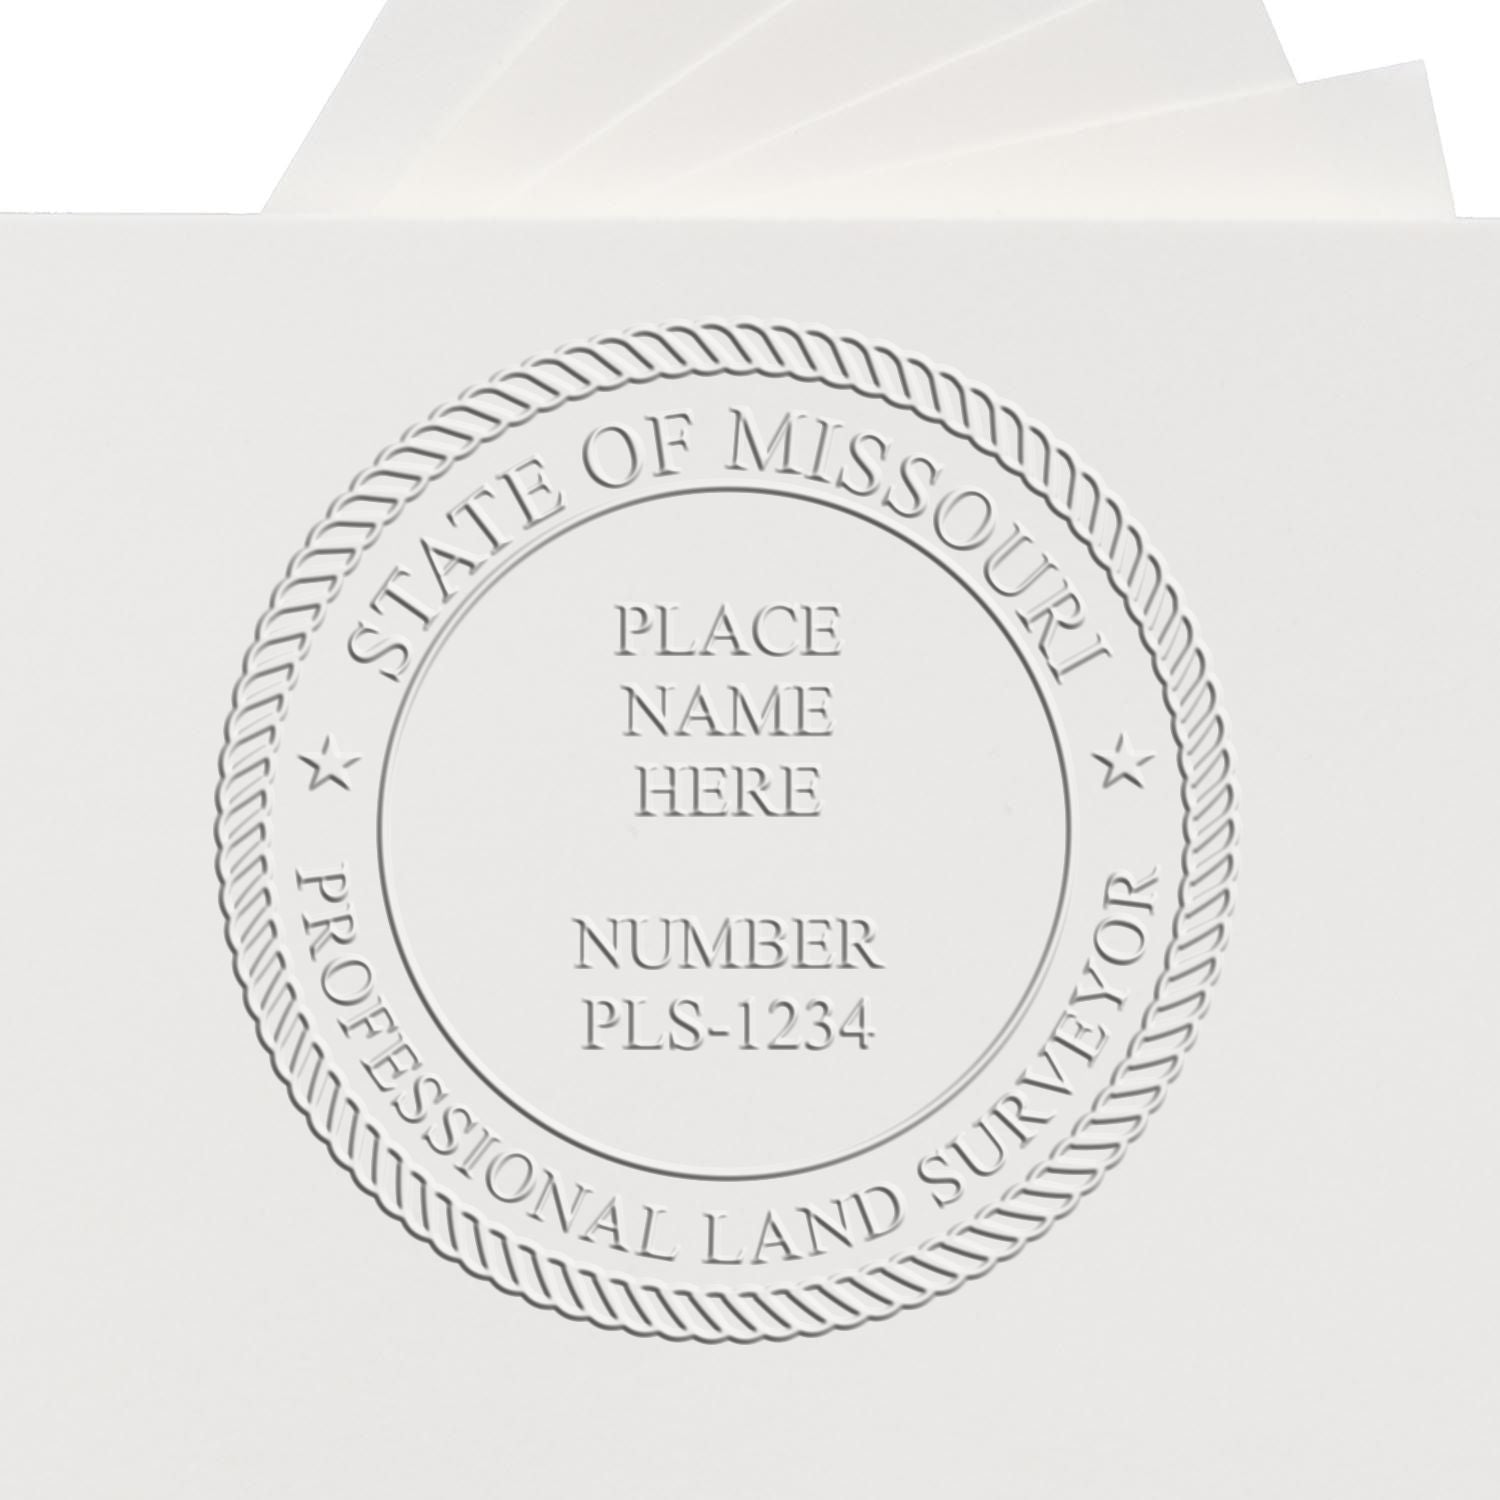 A stamped impression of the Long Reach Missouri Land Surveyor Seal in this stylish lifestyle photo, setting the tone for a unique and personalized product.